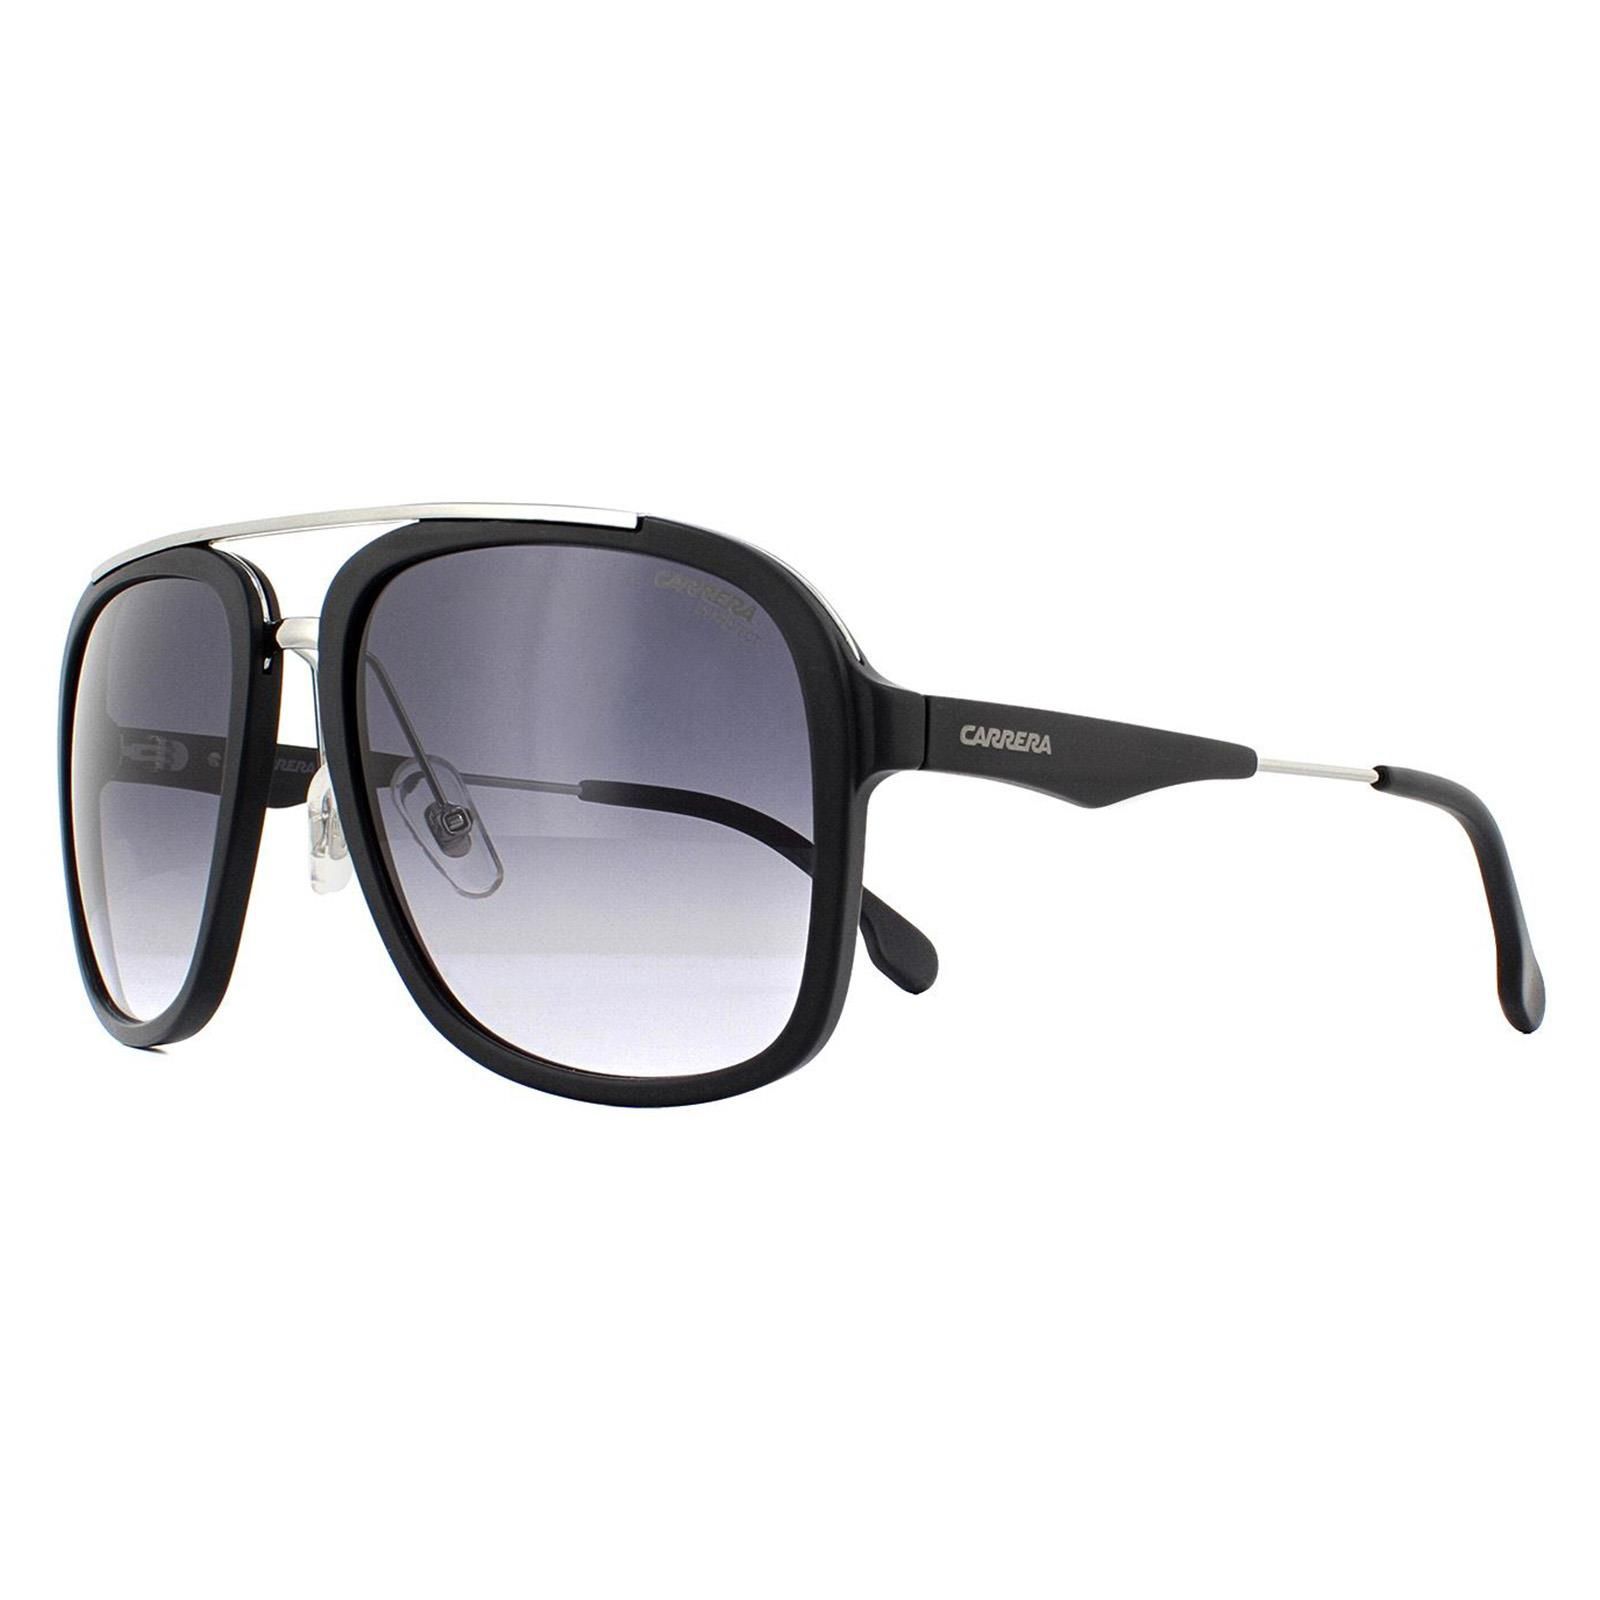 Carrera Sunglasses 133/S TI7 9O Ruthenium Matte Black Dark Grey Gradient have the latest trend for a top bar across the top of the frame for a trendy double bridge look in shiny metal matching the bridge and temple section also. Very fashionable and very popular!